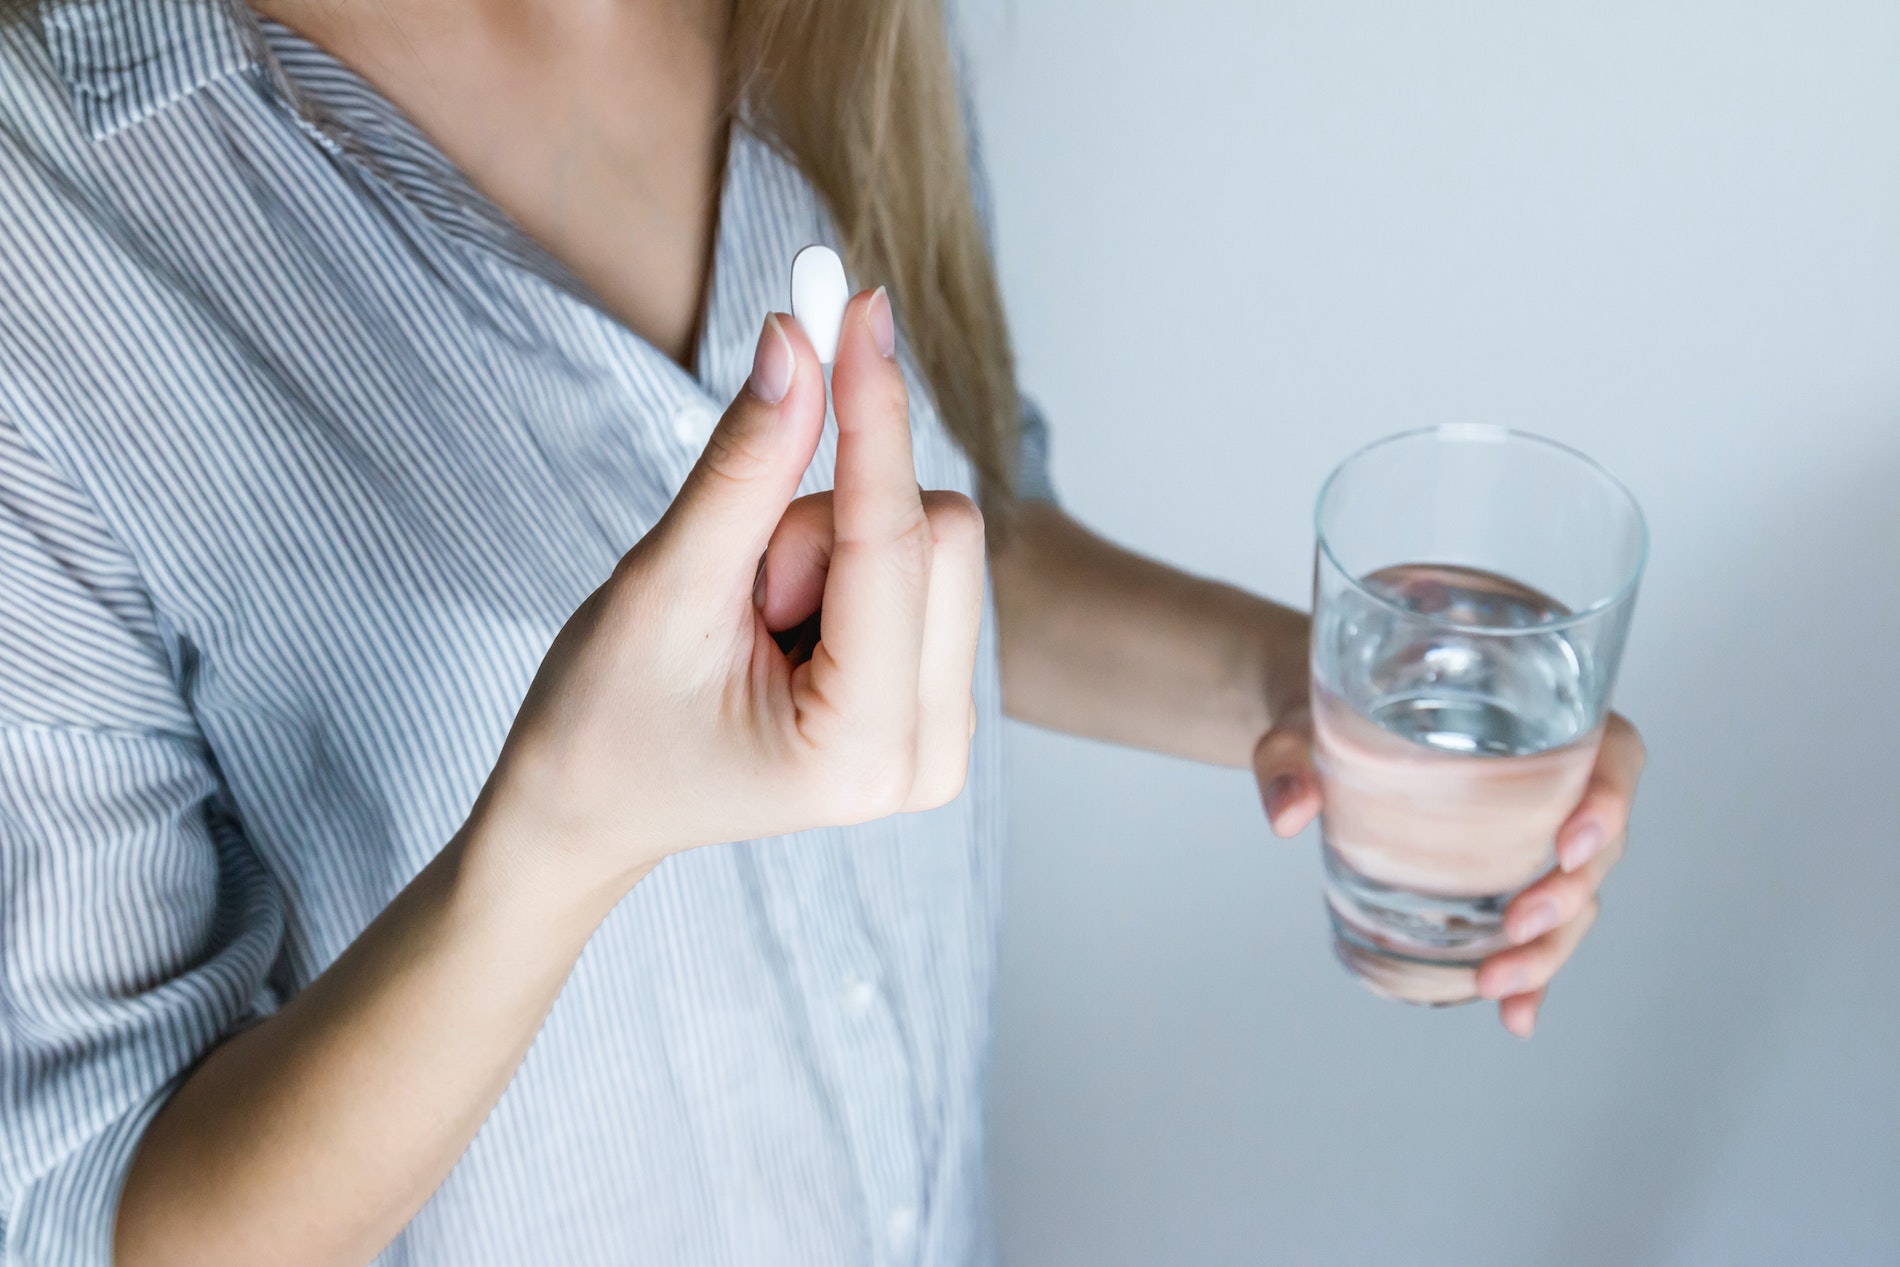 This picture shows a woman neck down, holding a glas of water and a pill